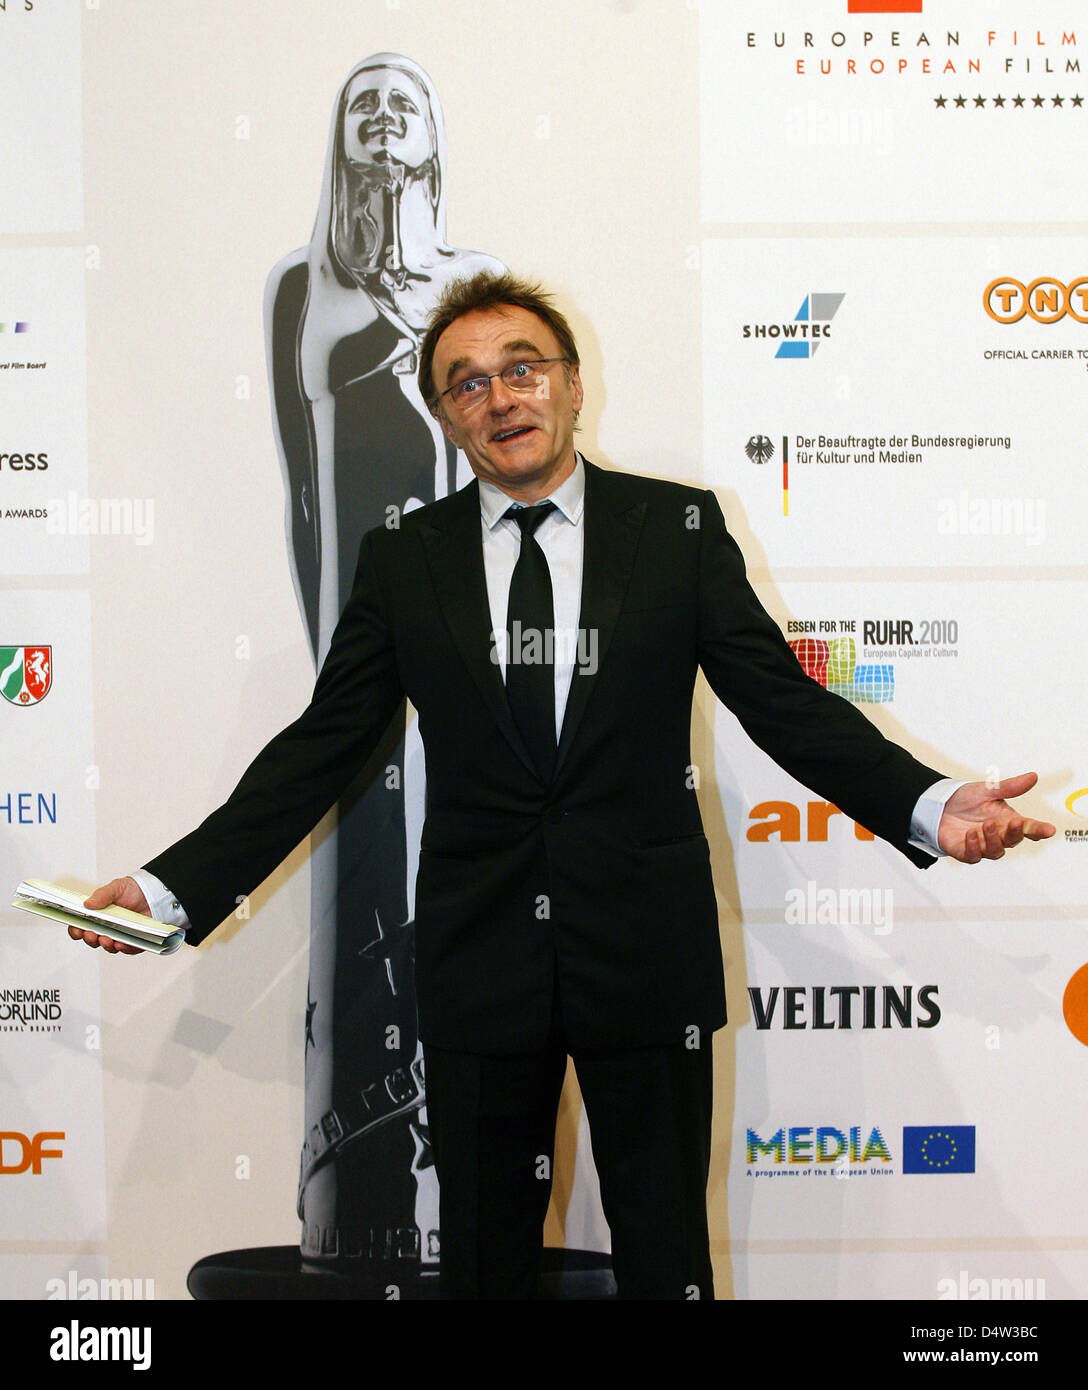 British director Danny Boyle attends the award ceremony for the European Film Awards 2009 at 'Jahrhunderthalle' in Bochum, Germany, 12 December 2009. The European Film Award, which is often called the European Oscar, is awarded annually in 16 categories by the European Film Academy. Photo: Roland Weihrauch Stock Photo